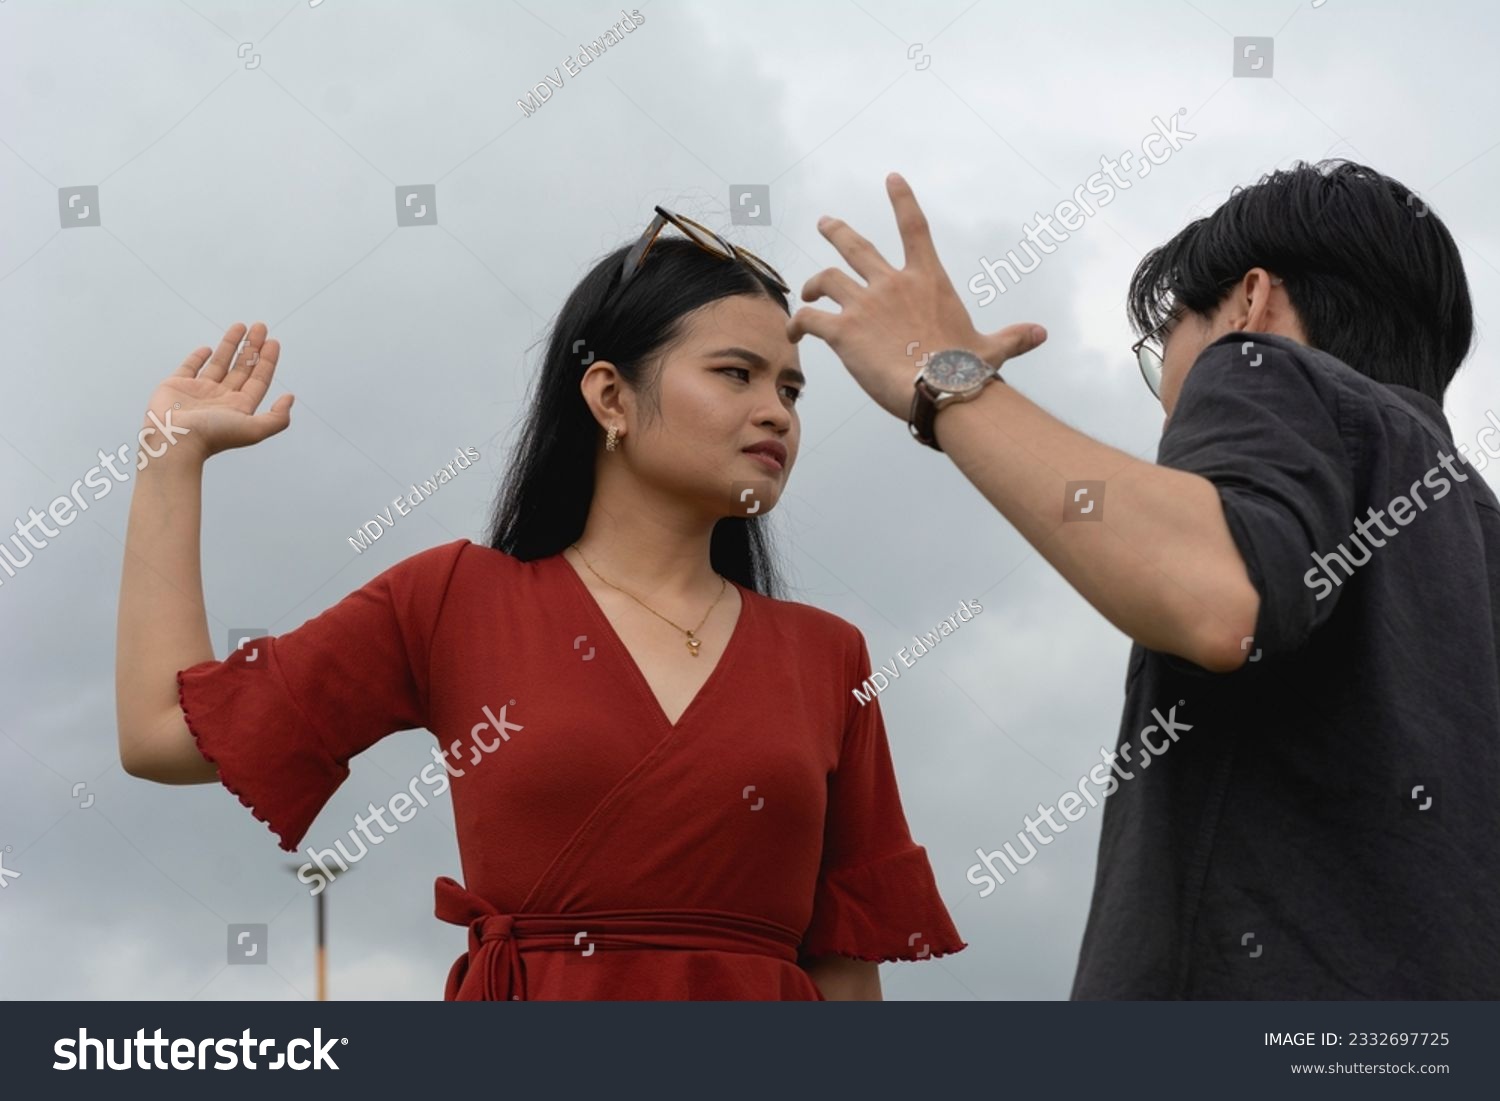 An annoyed woman threatens to slap her submissive and meek boyfriend during an argument. Outdoor scene. #2332697725